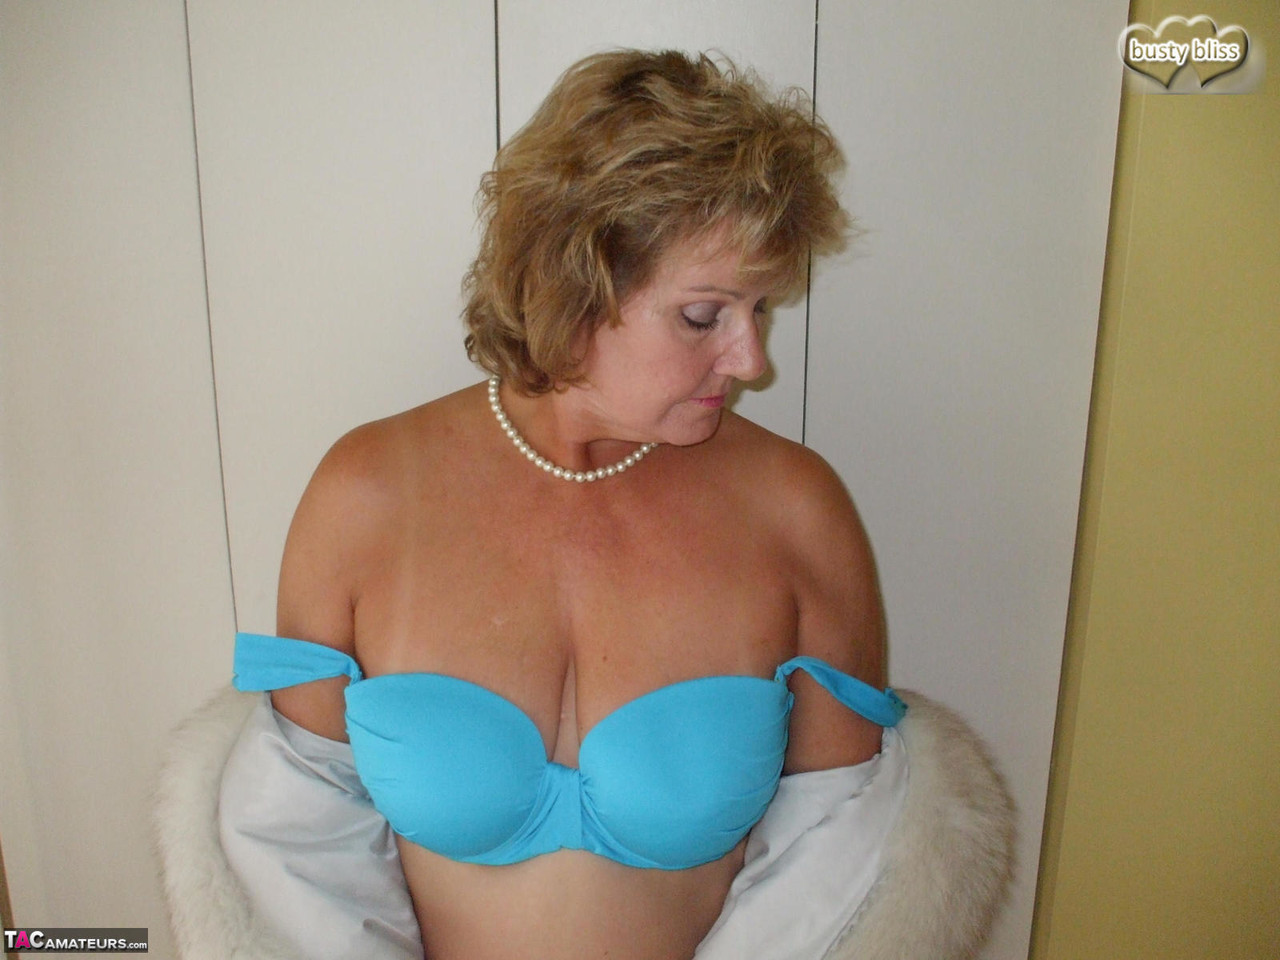 Solo granny Busty Bliss looses her tan lined tits from a fur coat 色情照片 #428156576 | TAC Amateurs Pics, Busty Bliss, Granny, 手机色情